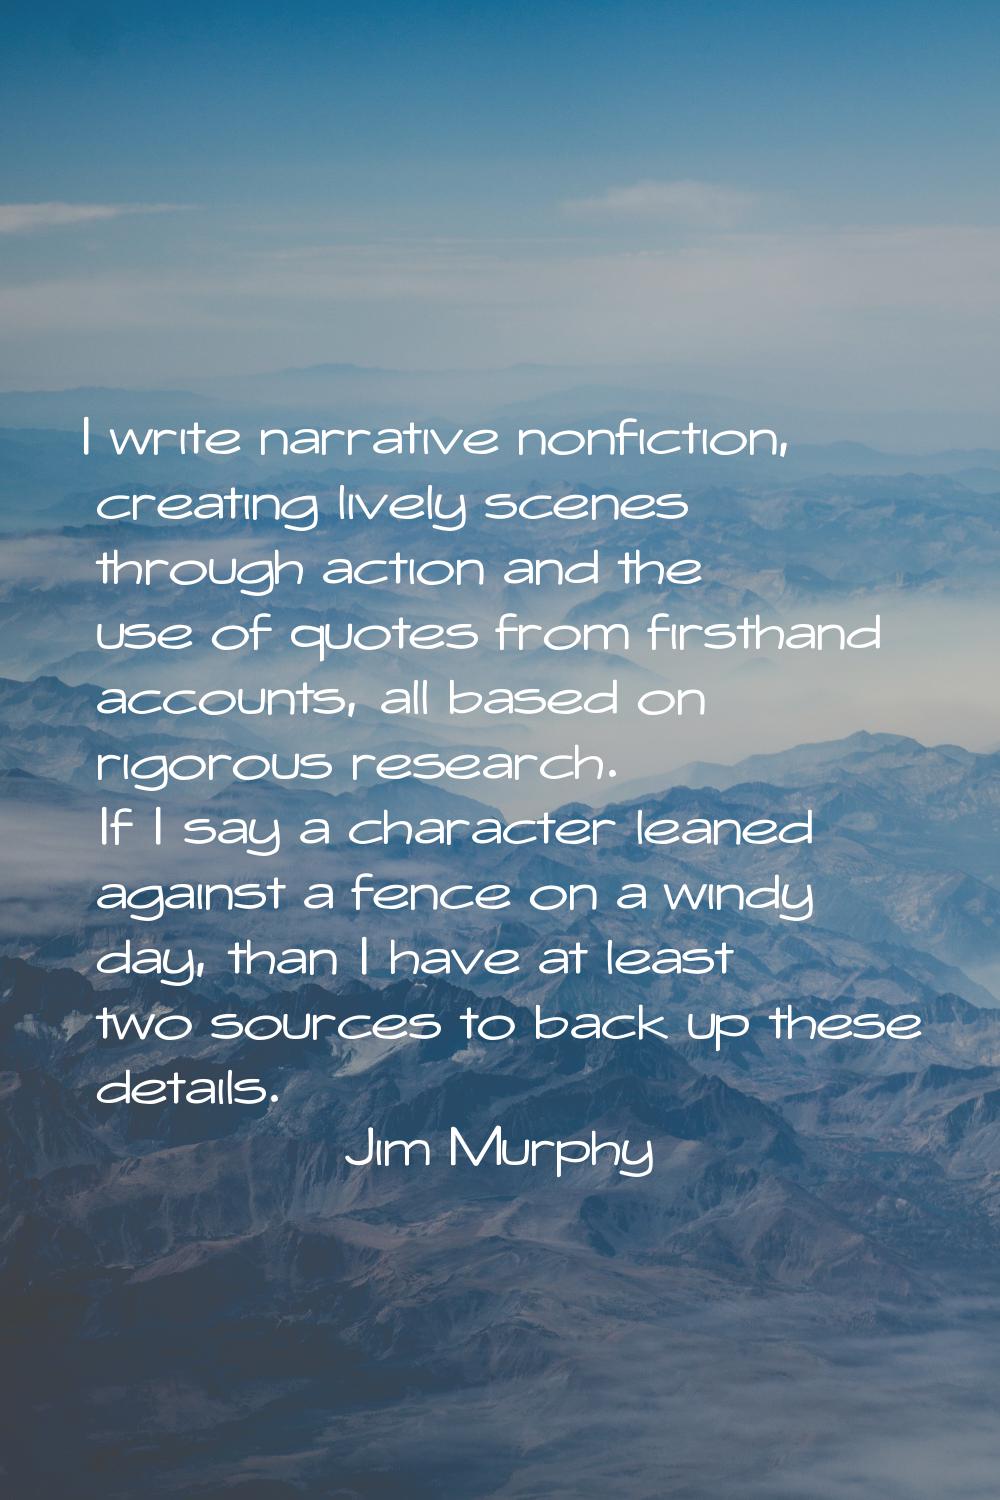 I write narrative nonfiction, creating lively scenes through action and the use of quotes from firs